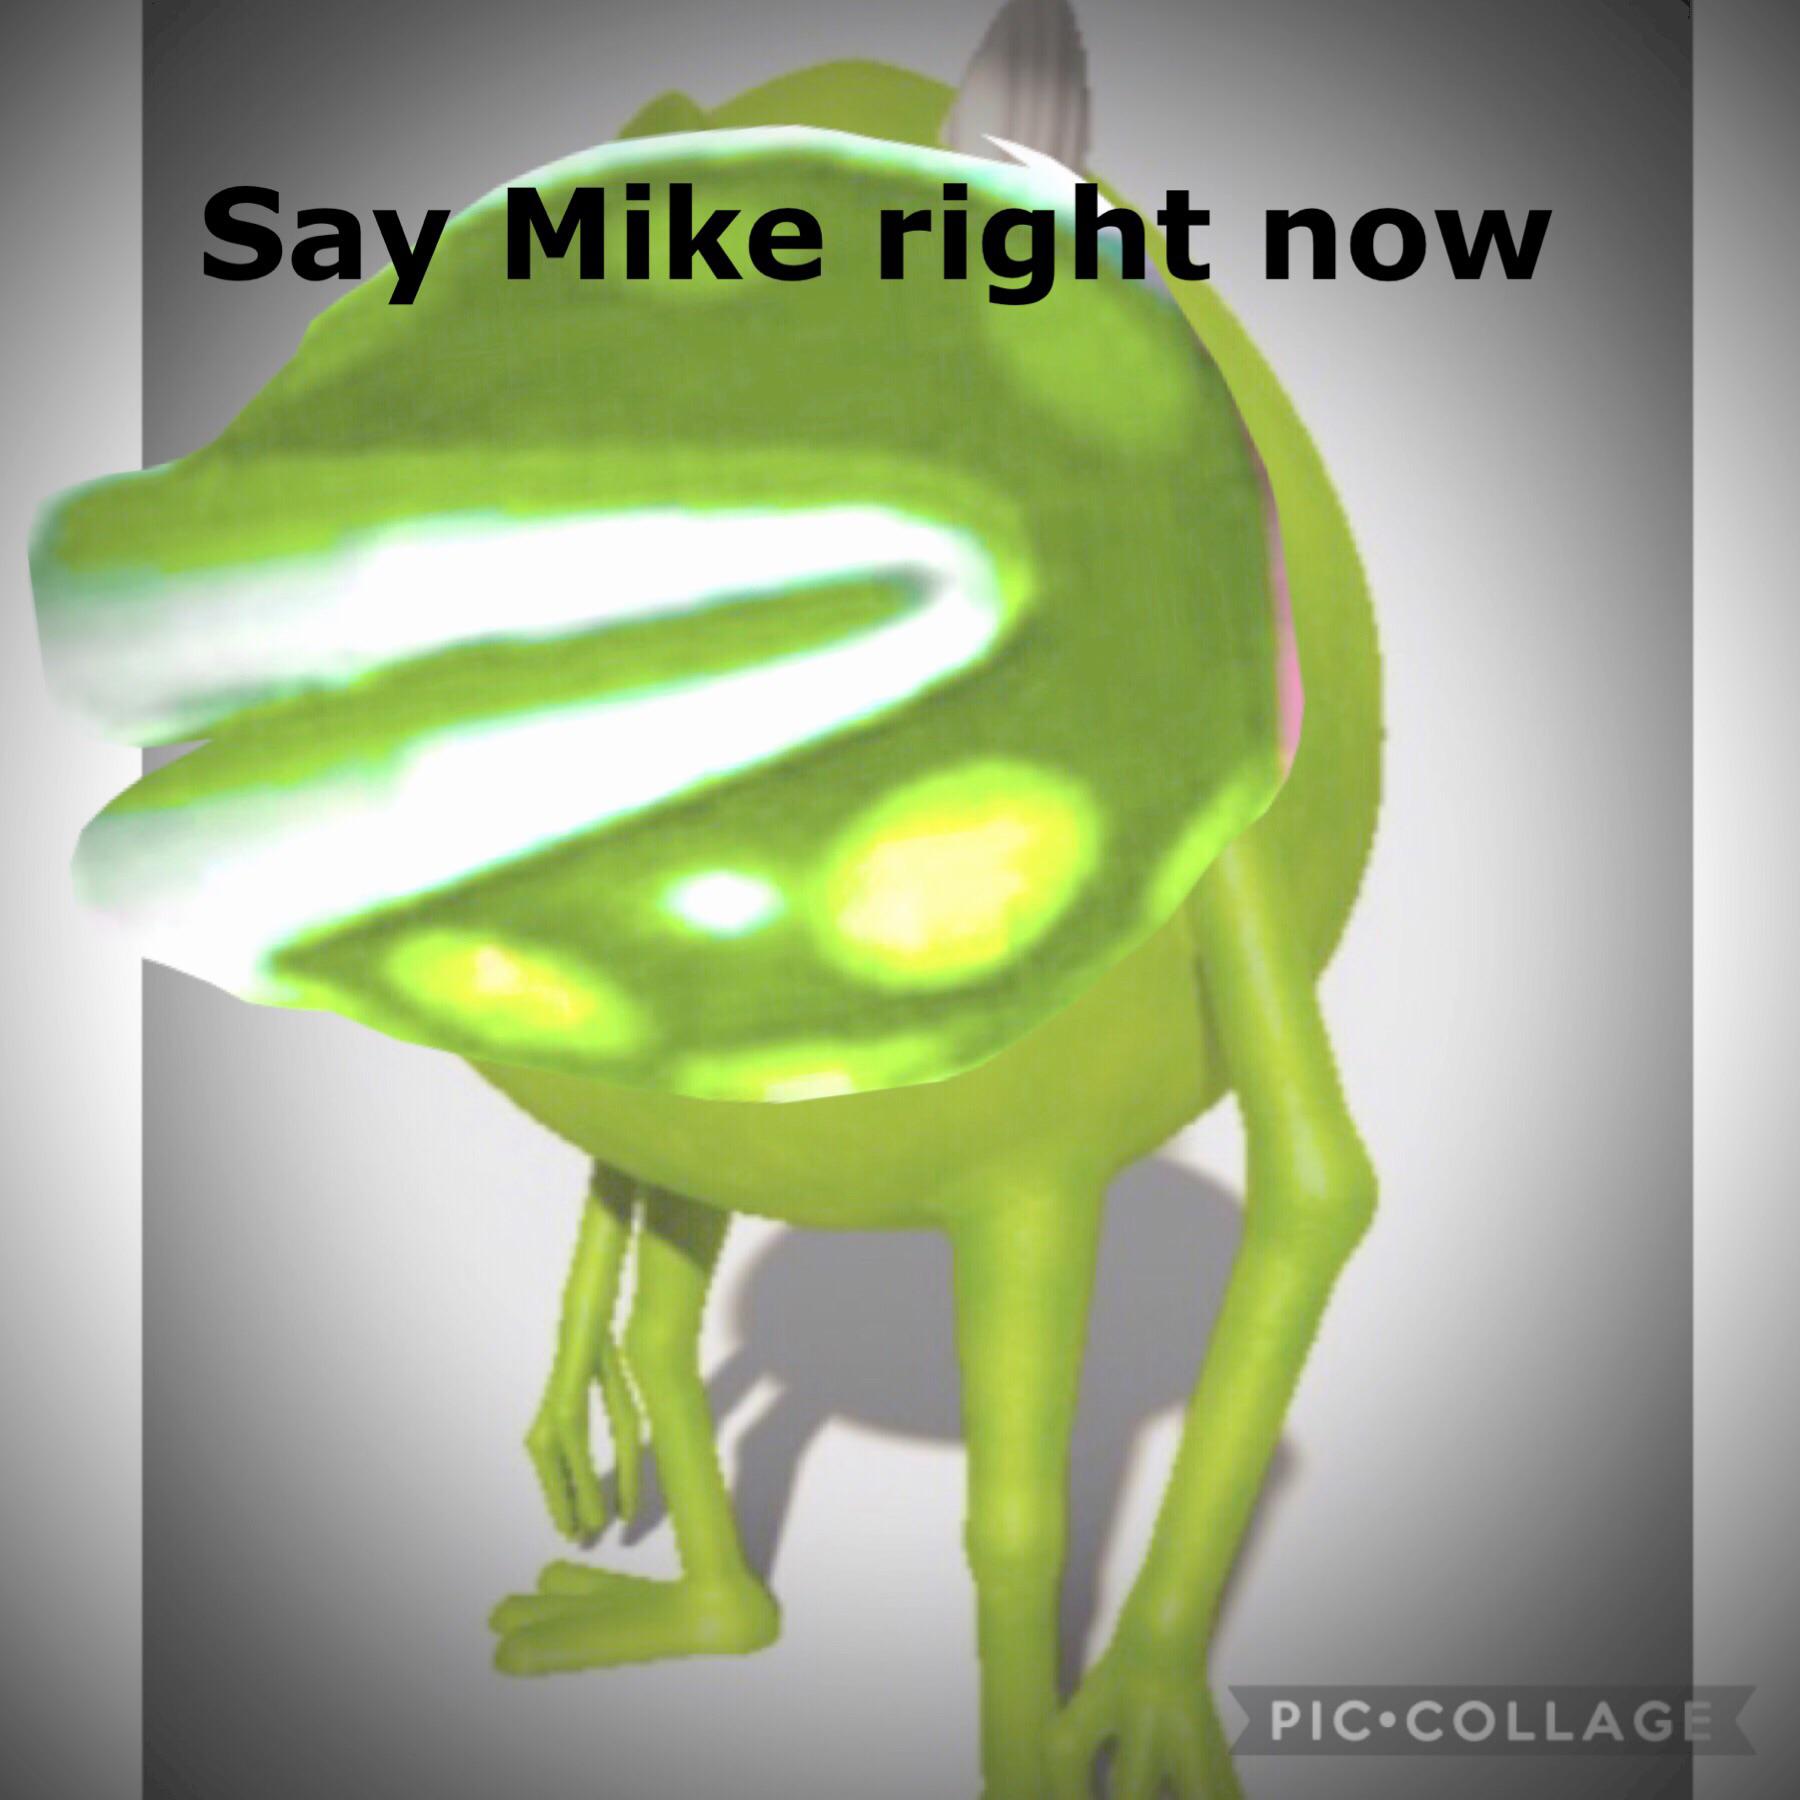 cursed memes - illustration - Say Mike right now Piccollage